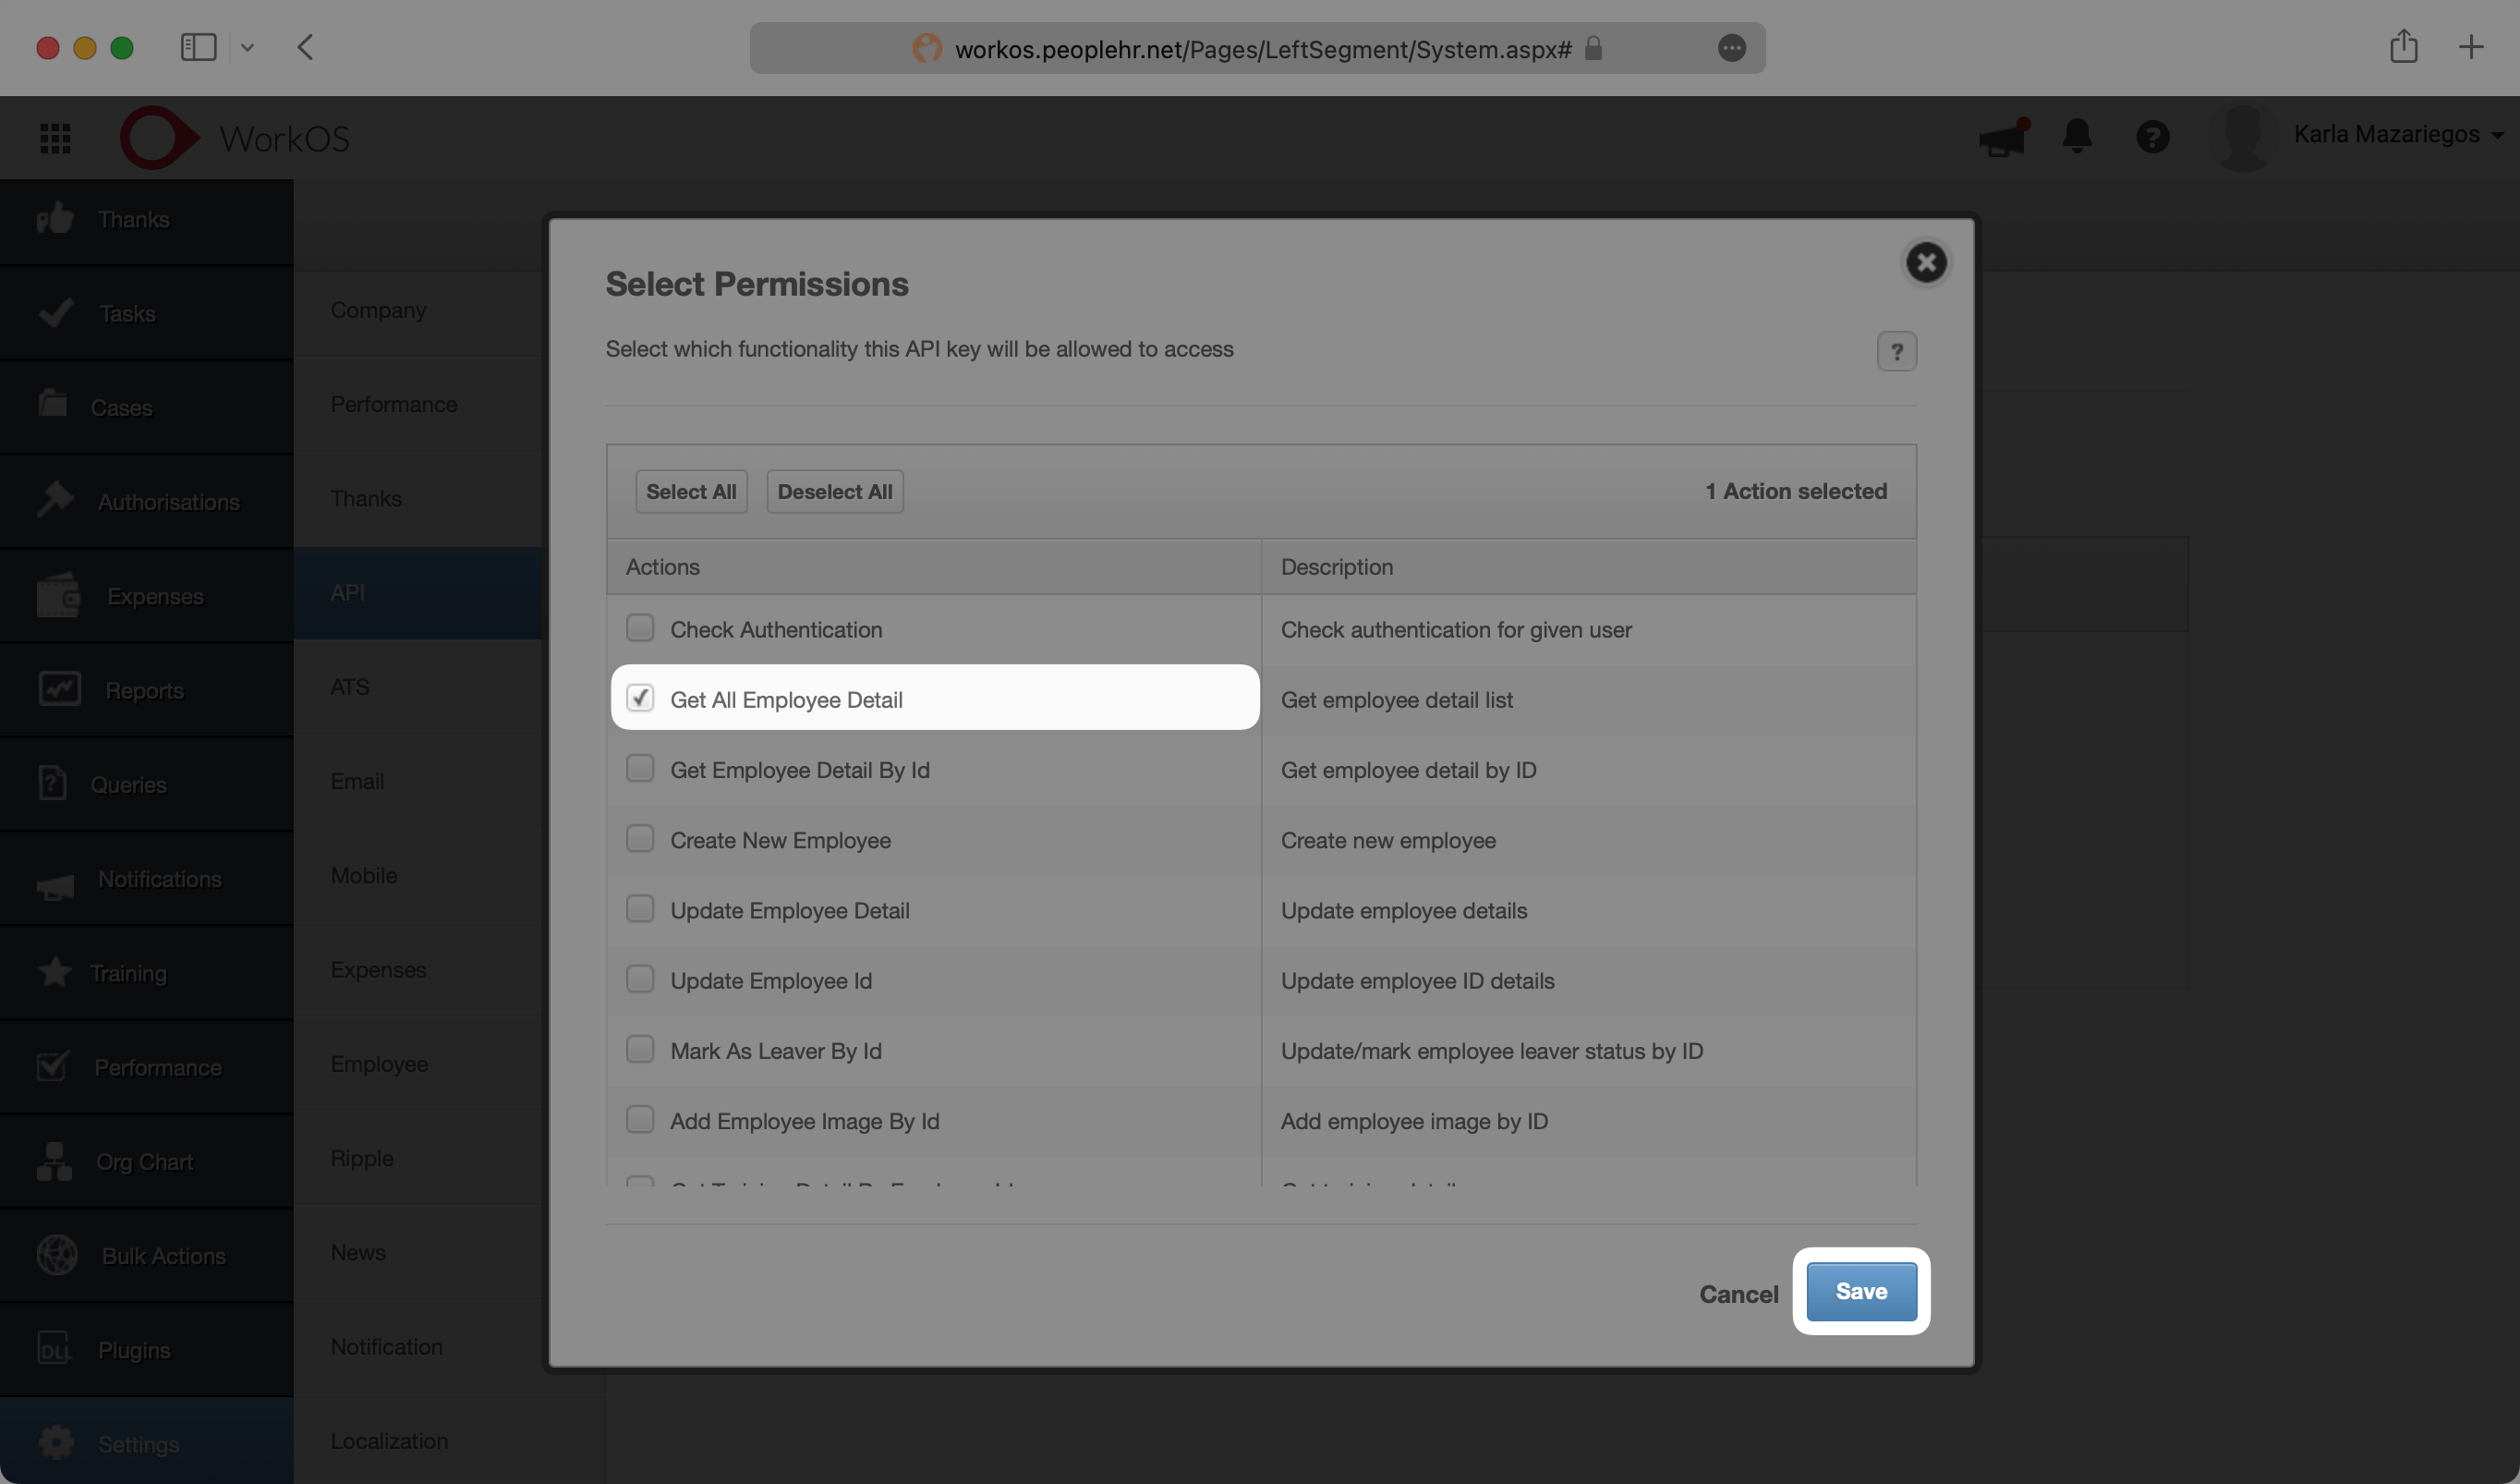 A screenshot showing where to select the "Get All Employee Detail" permission is located in the Access People HR Dashboard.